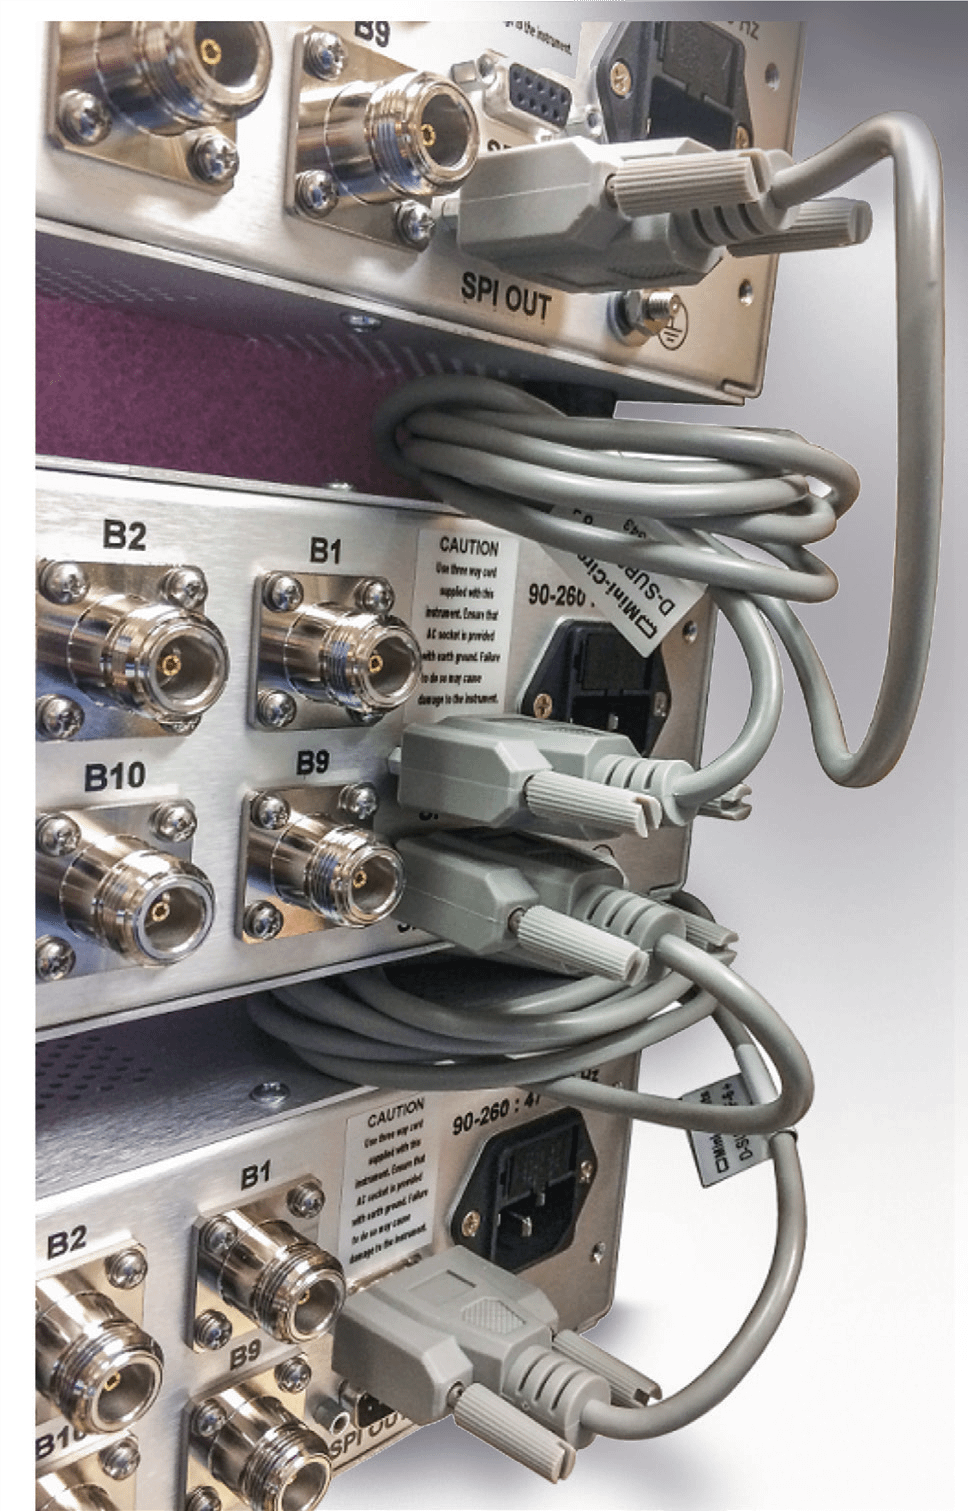 High-Order Switch Matrices Facilitate Network Infrastructure Testing